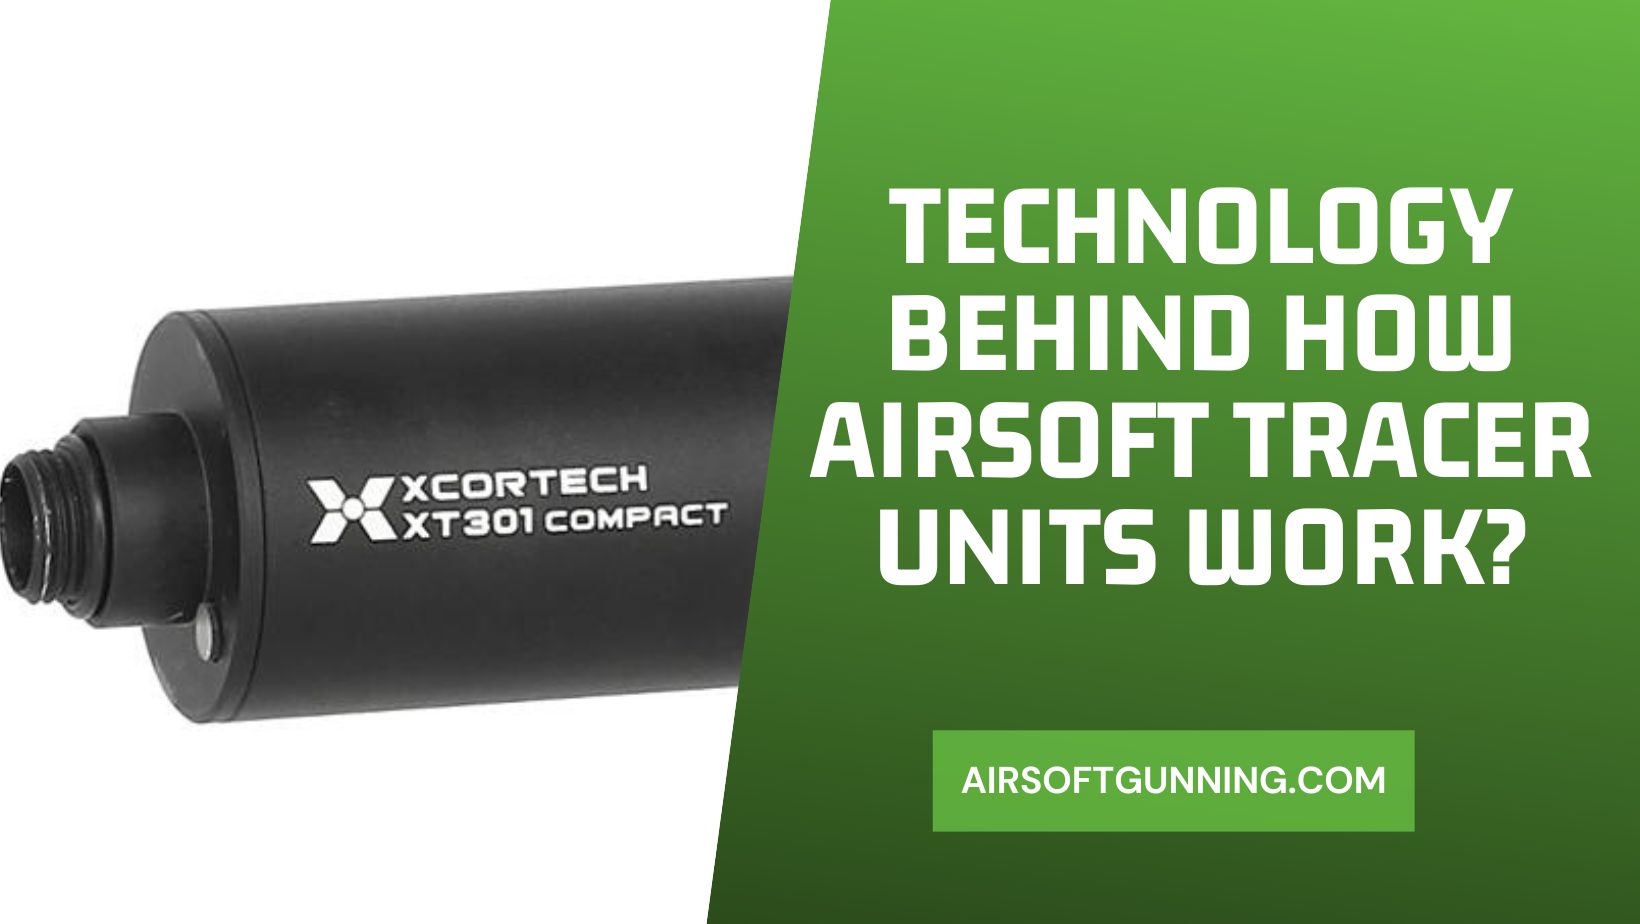 Technology Behind How Airsoft Tracer Units Work